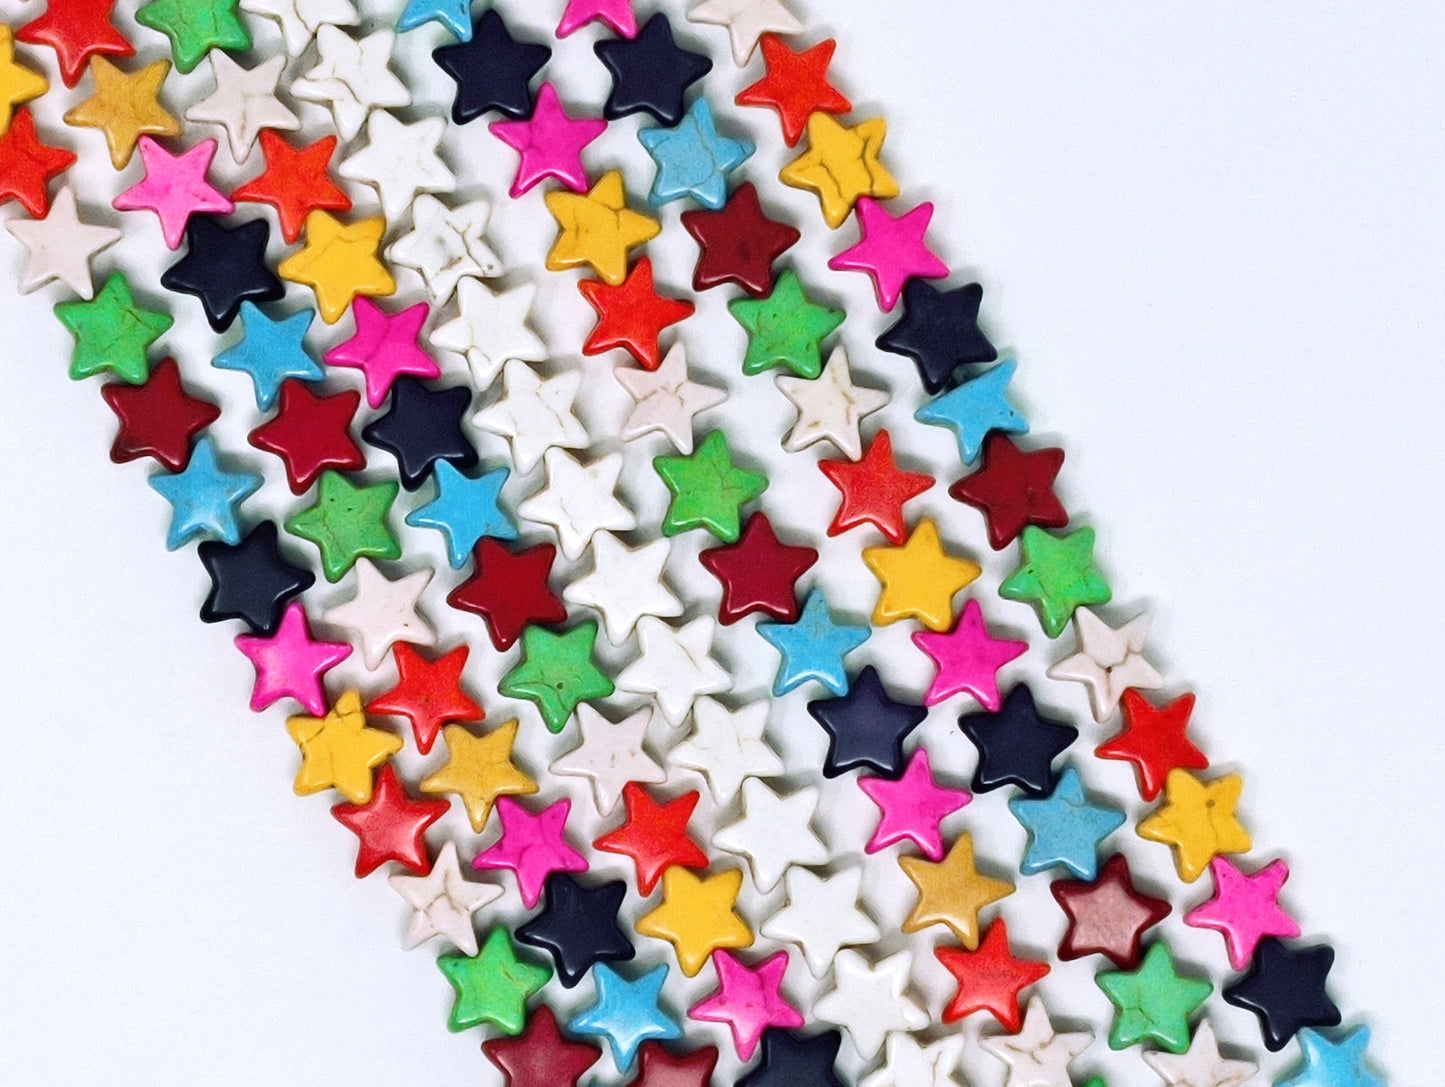 Star beads, Dyed Mixed Color Synthetic Turquoise Beads, 12 x 12mm, Set 25pcs